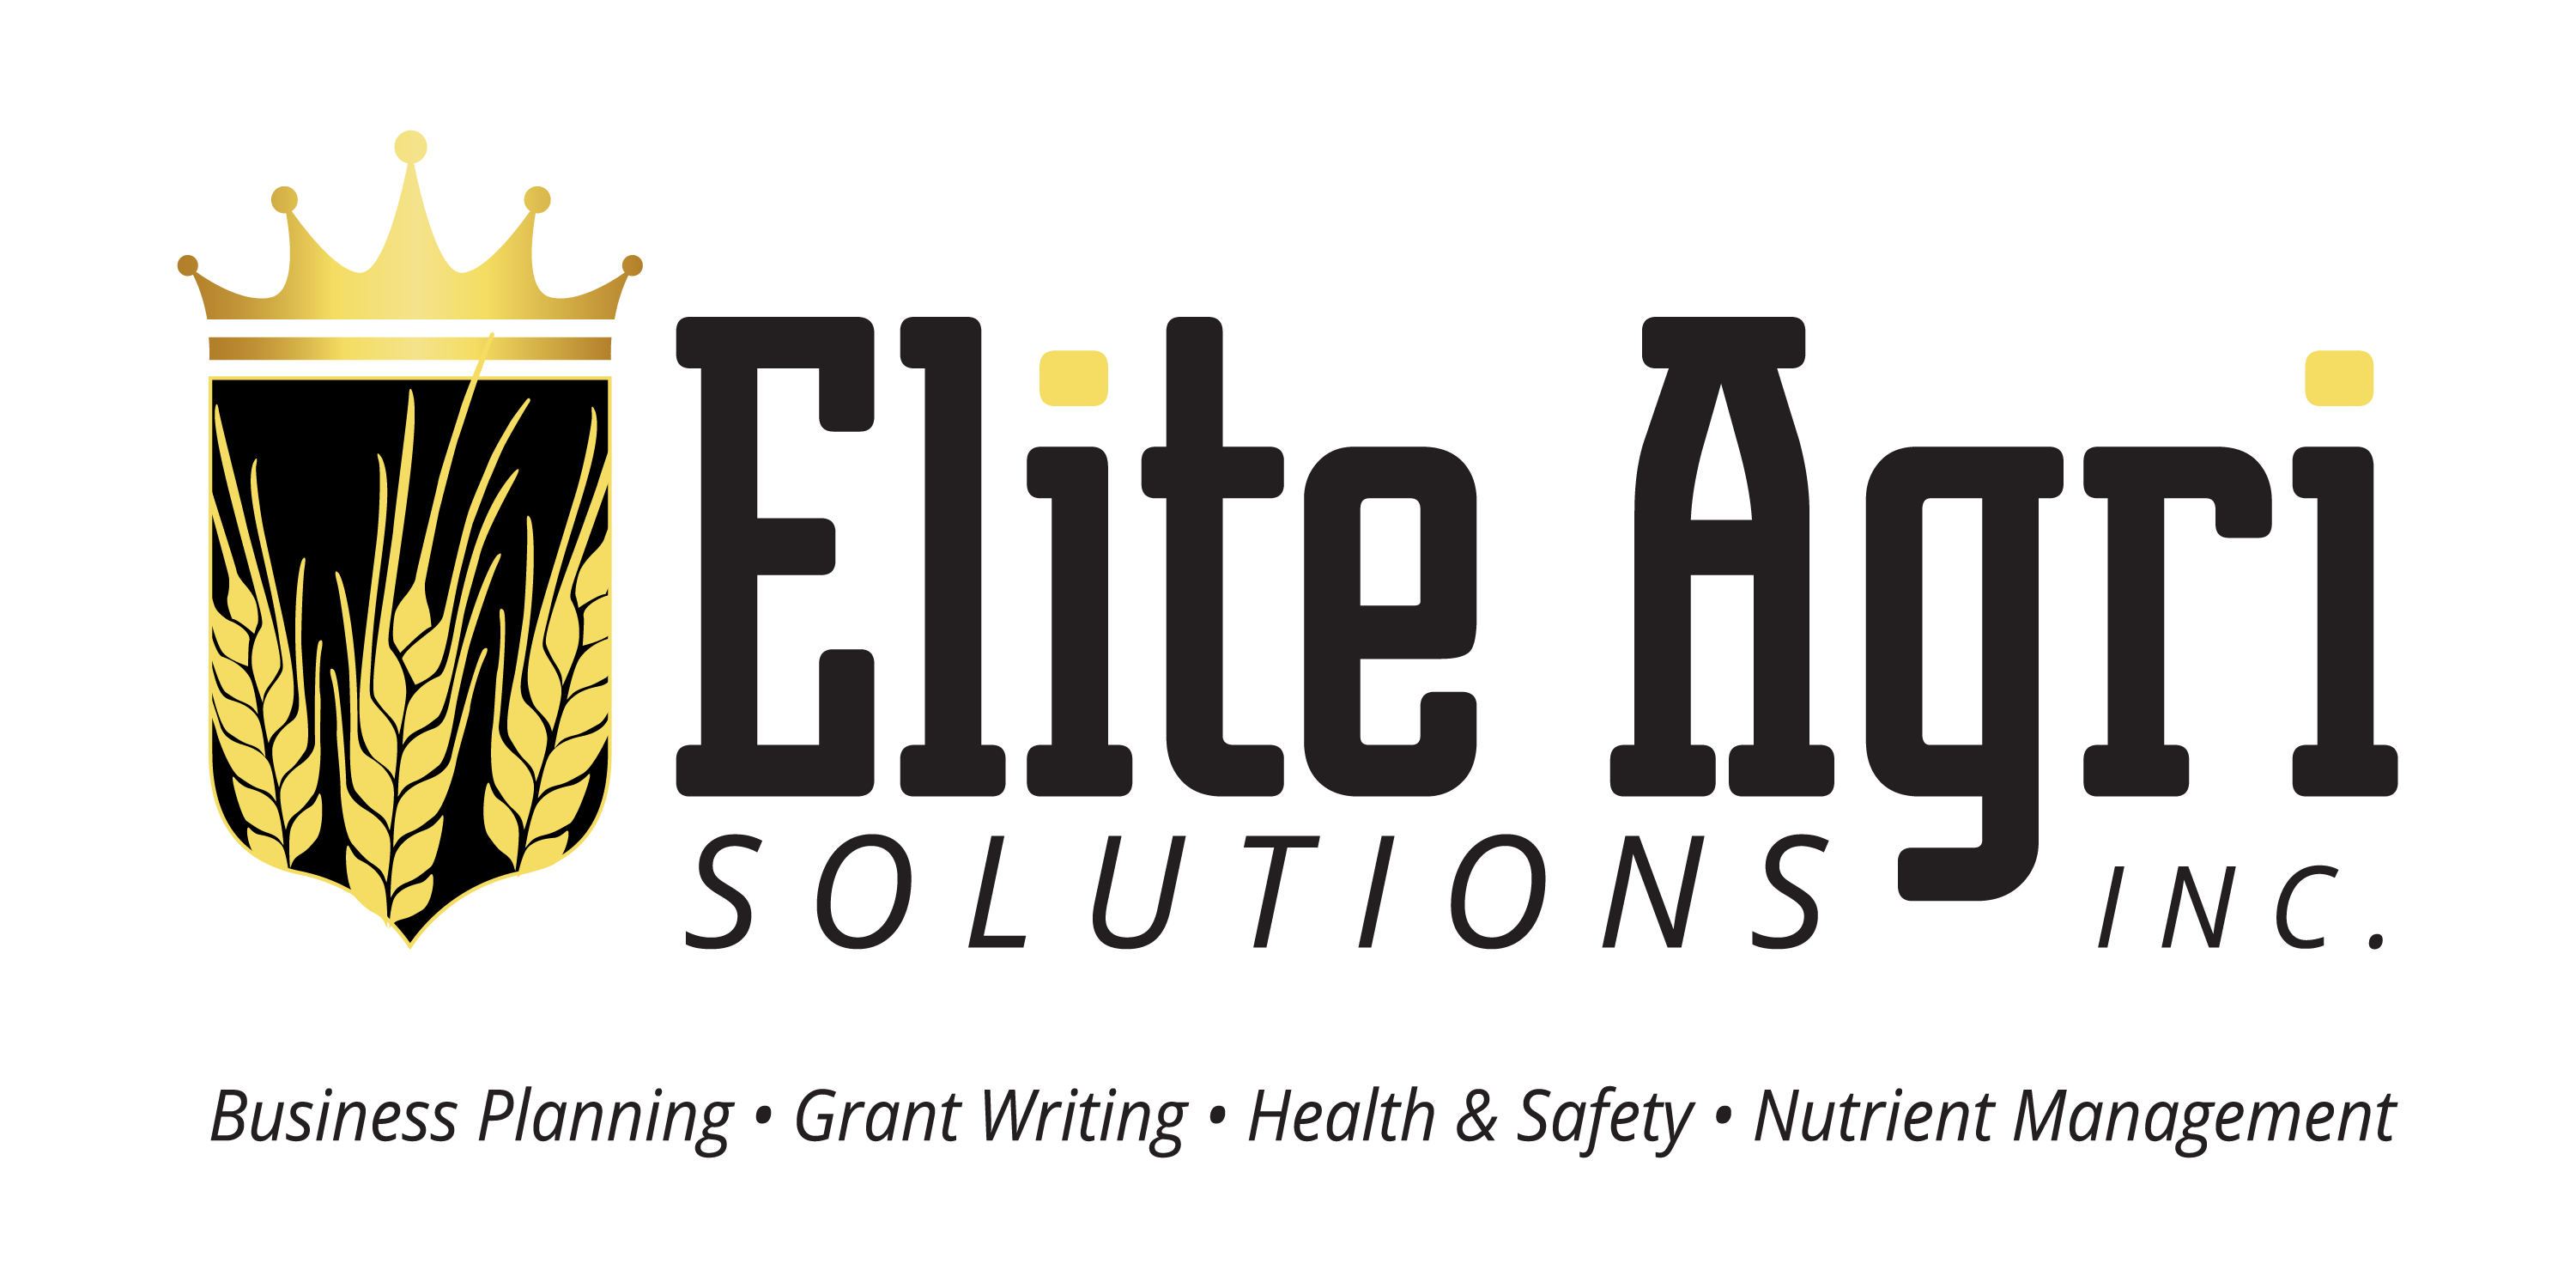 Logo d'Elite Agri Solutions Inc. - Business Planning, Grant Writing, Health & Safety and Nutrient Management